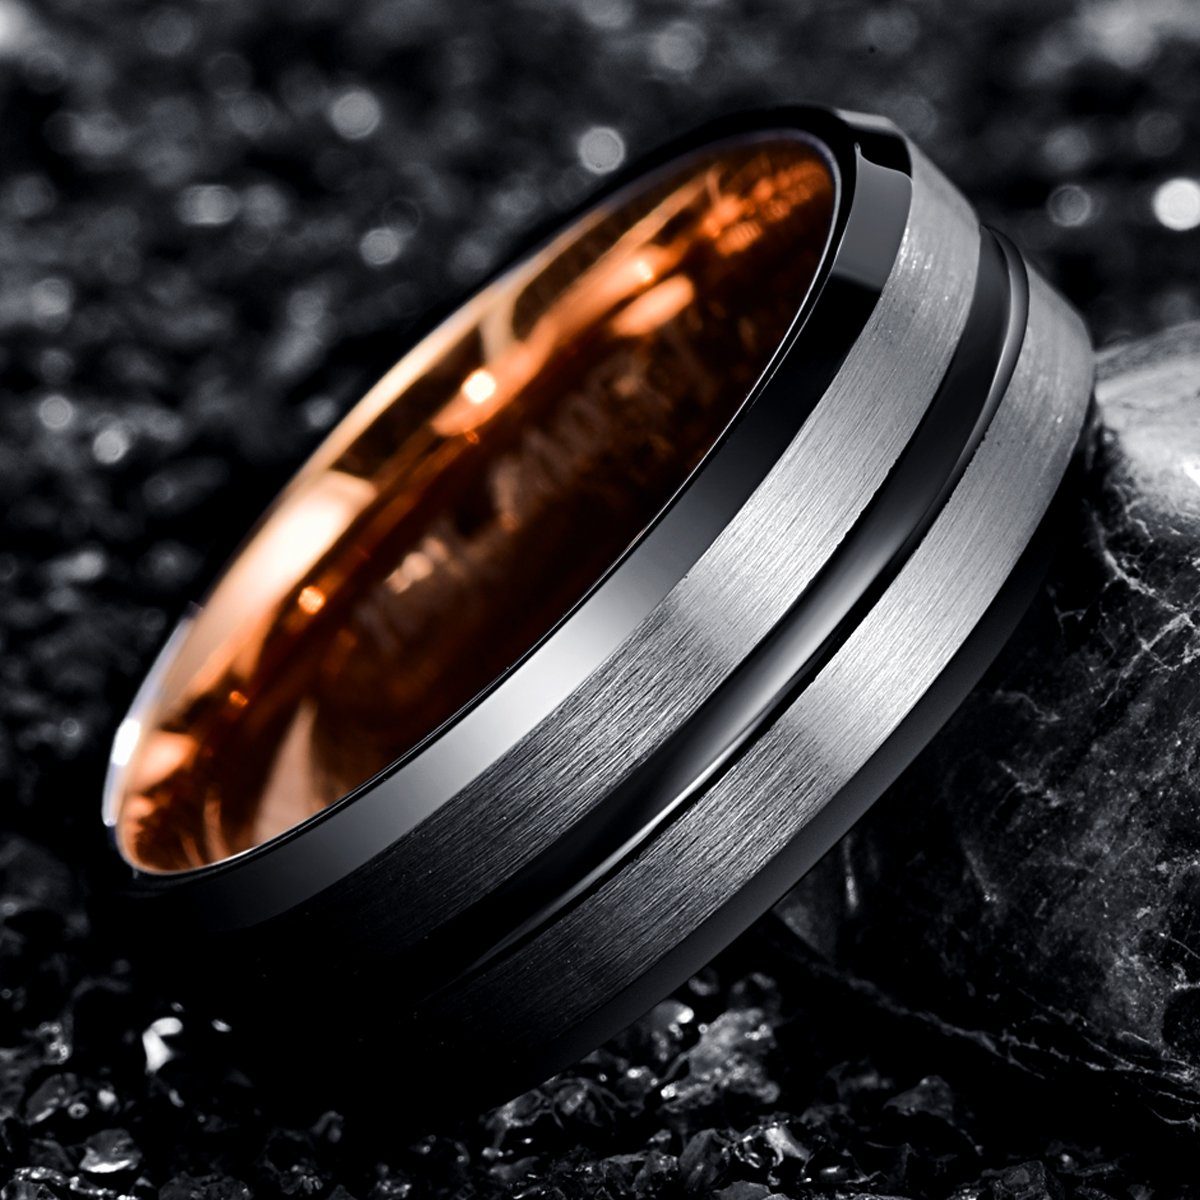 8mm Black Groove & Steel Frosted Surface Rose Gold Tungsten Mens Ring